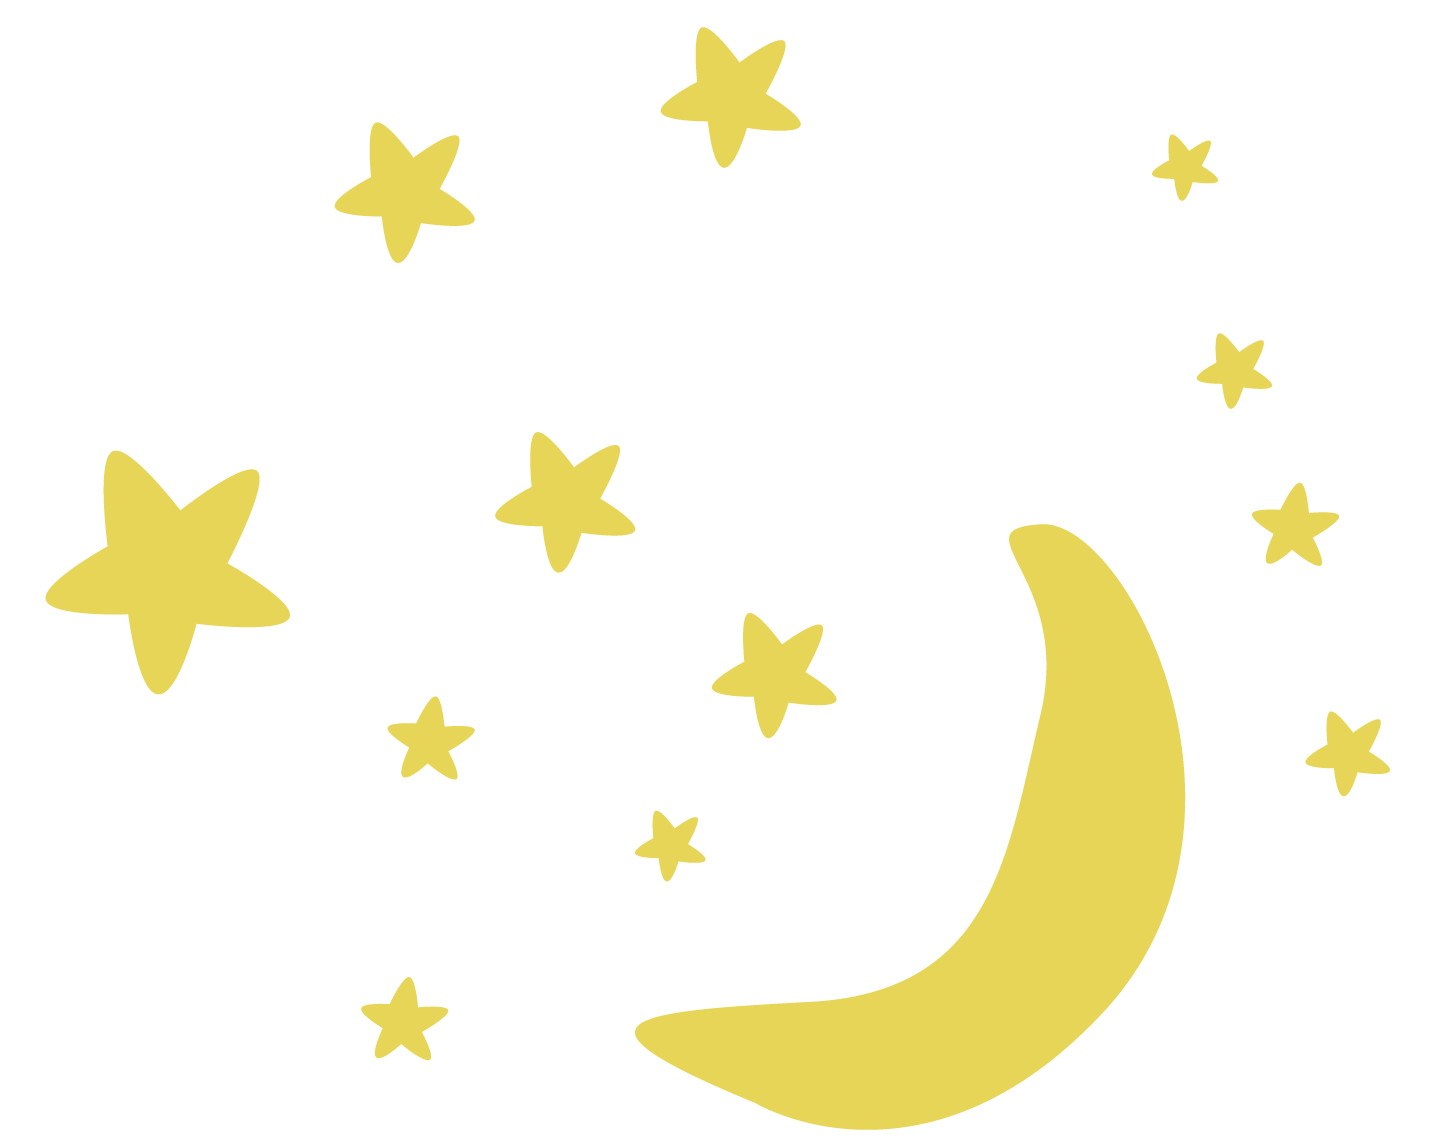 Twitter LINE Computer font Pattern - Moon and stars png download - 1438